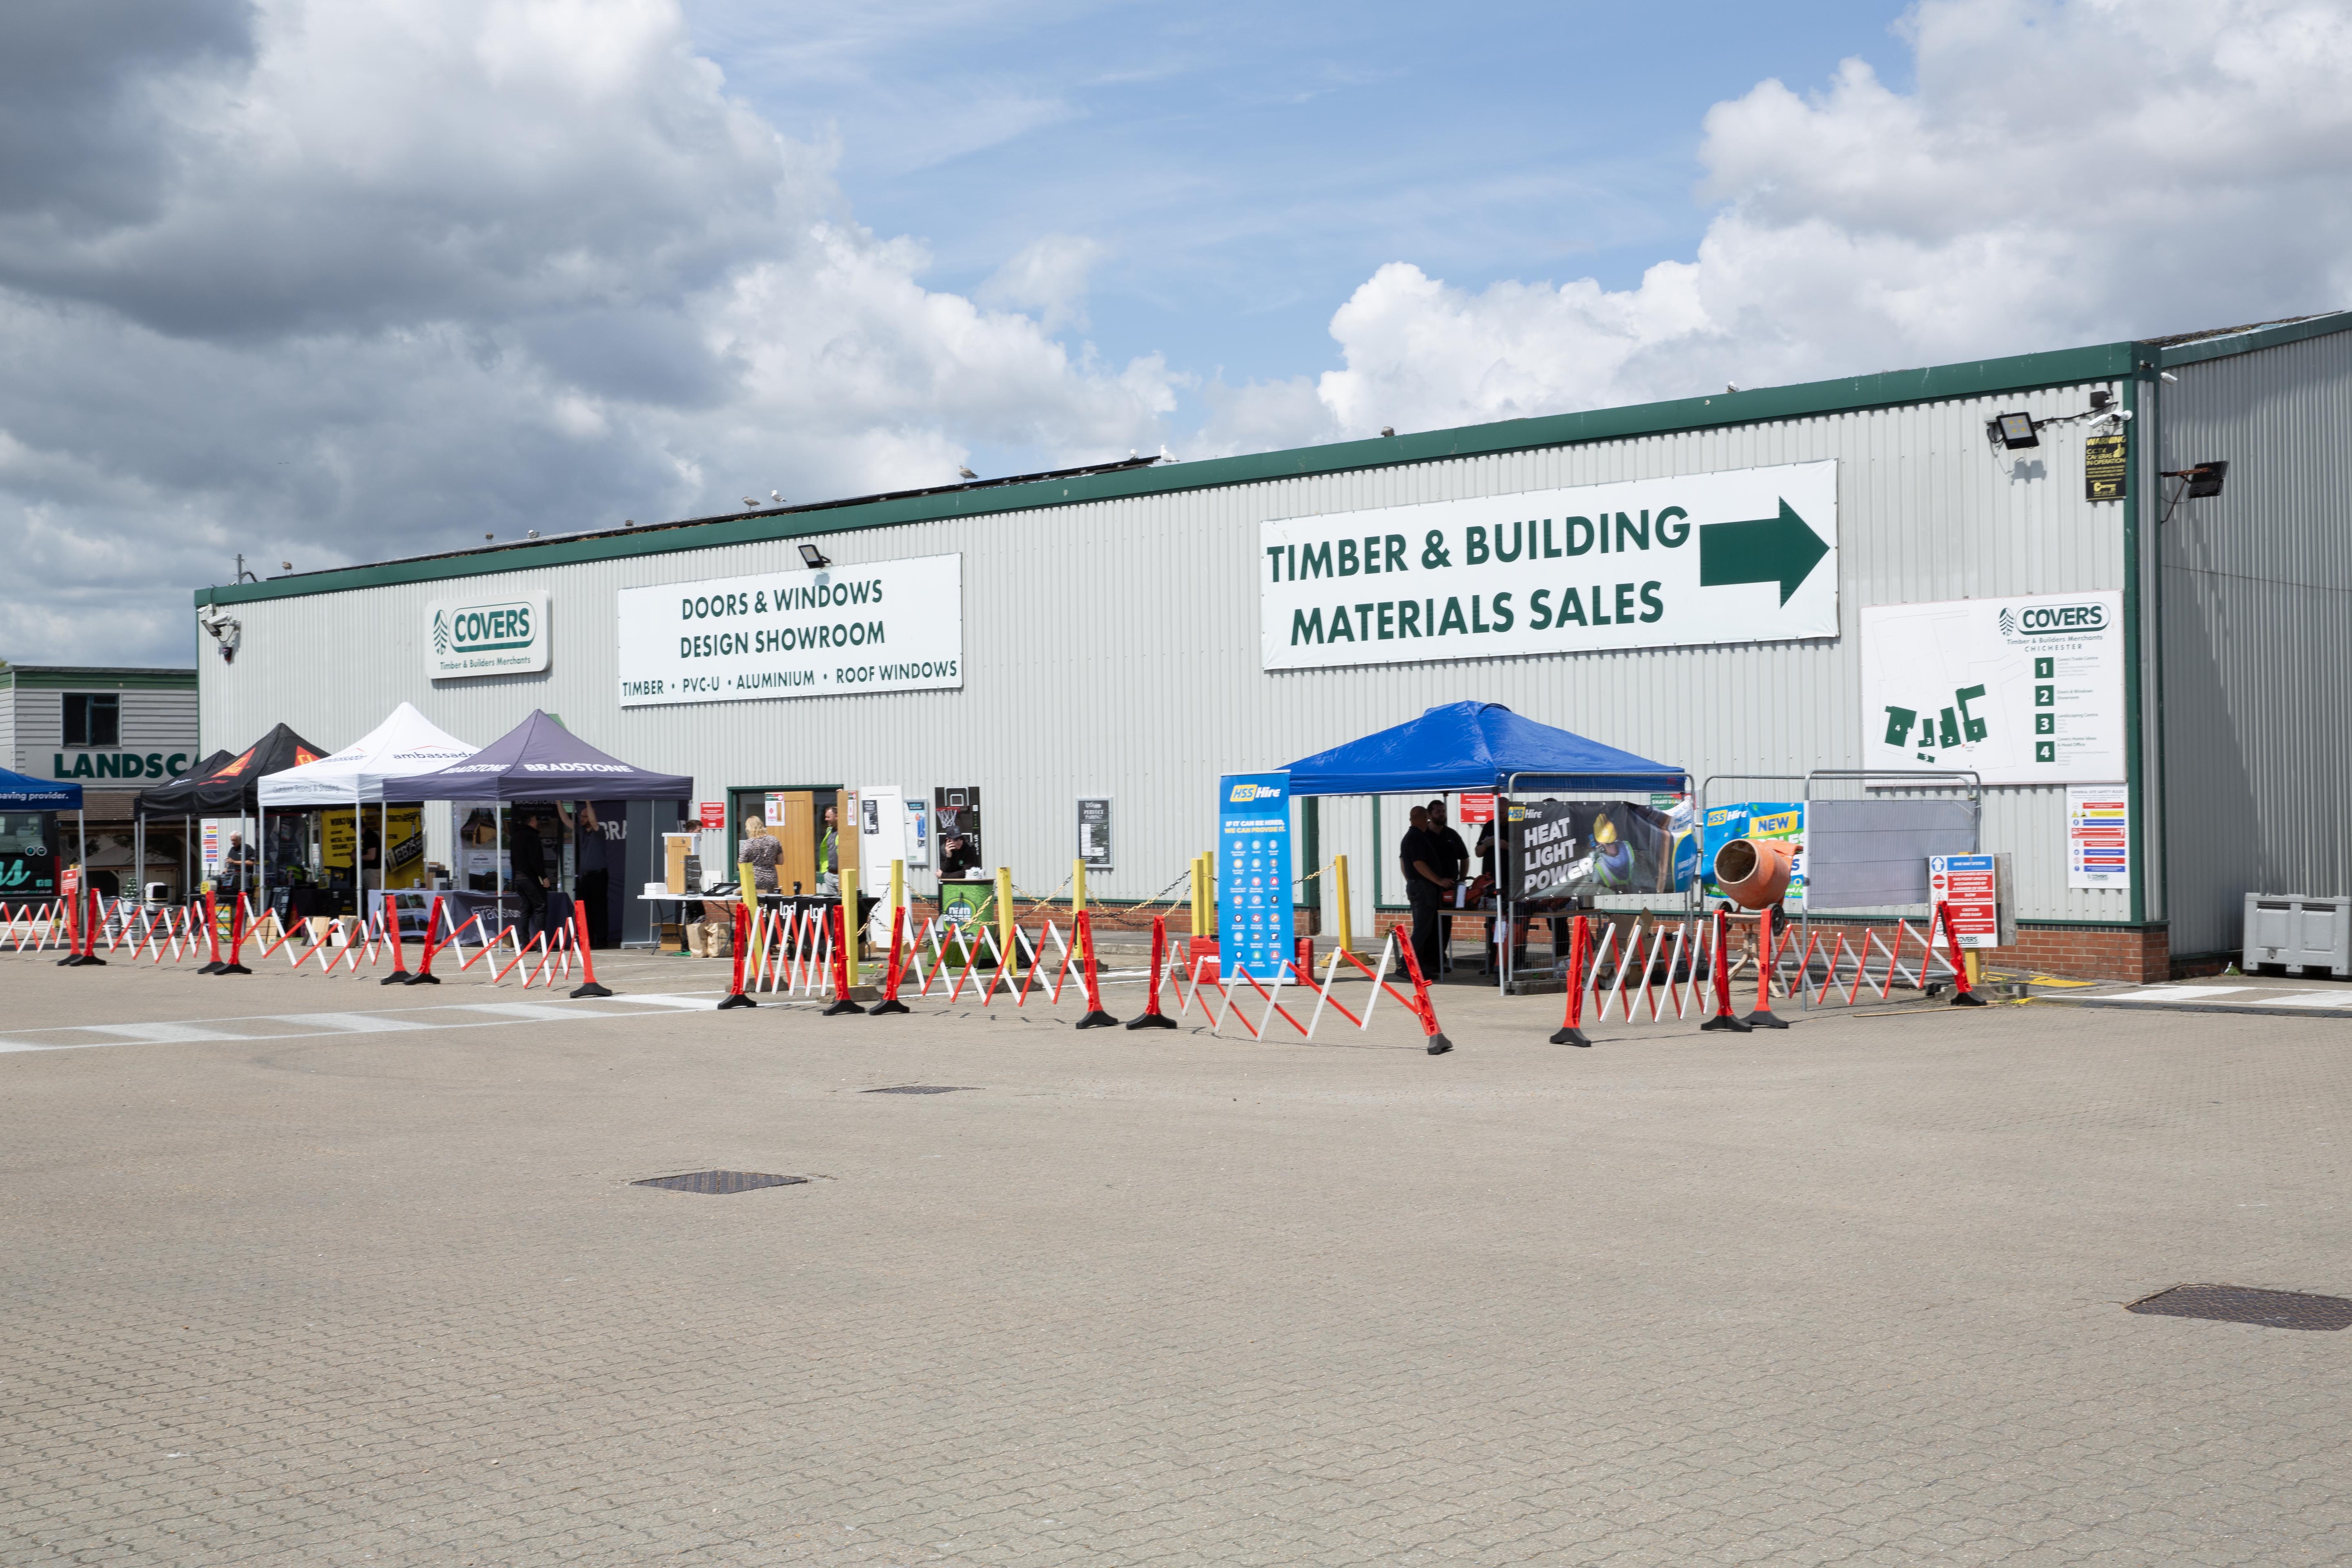 Successful demonstration event held at Chichester builders merchant